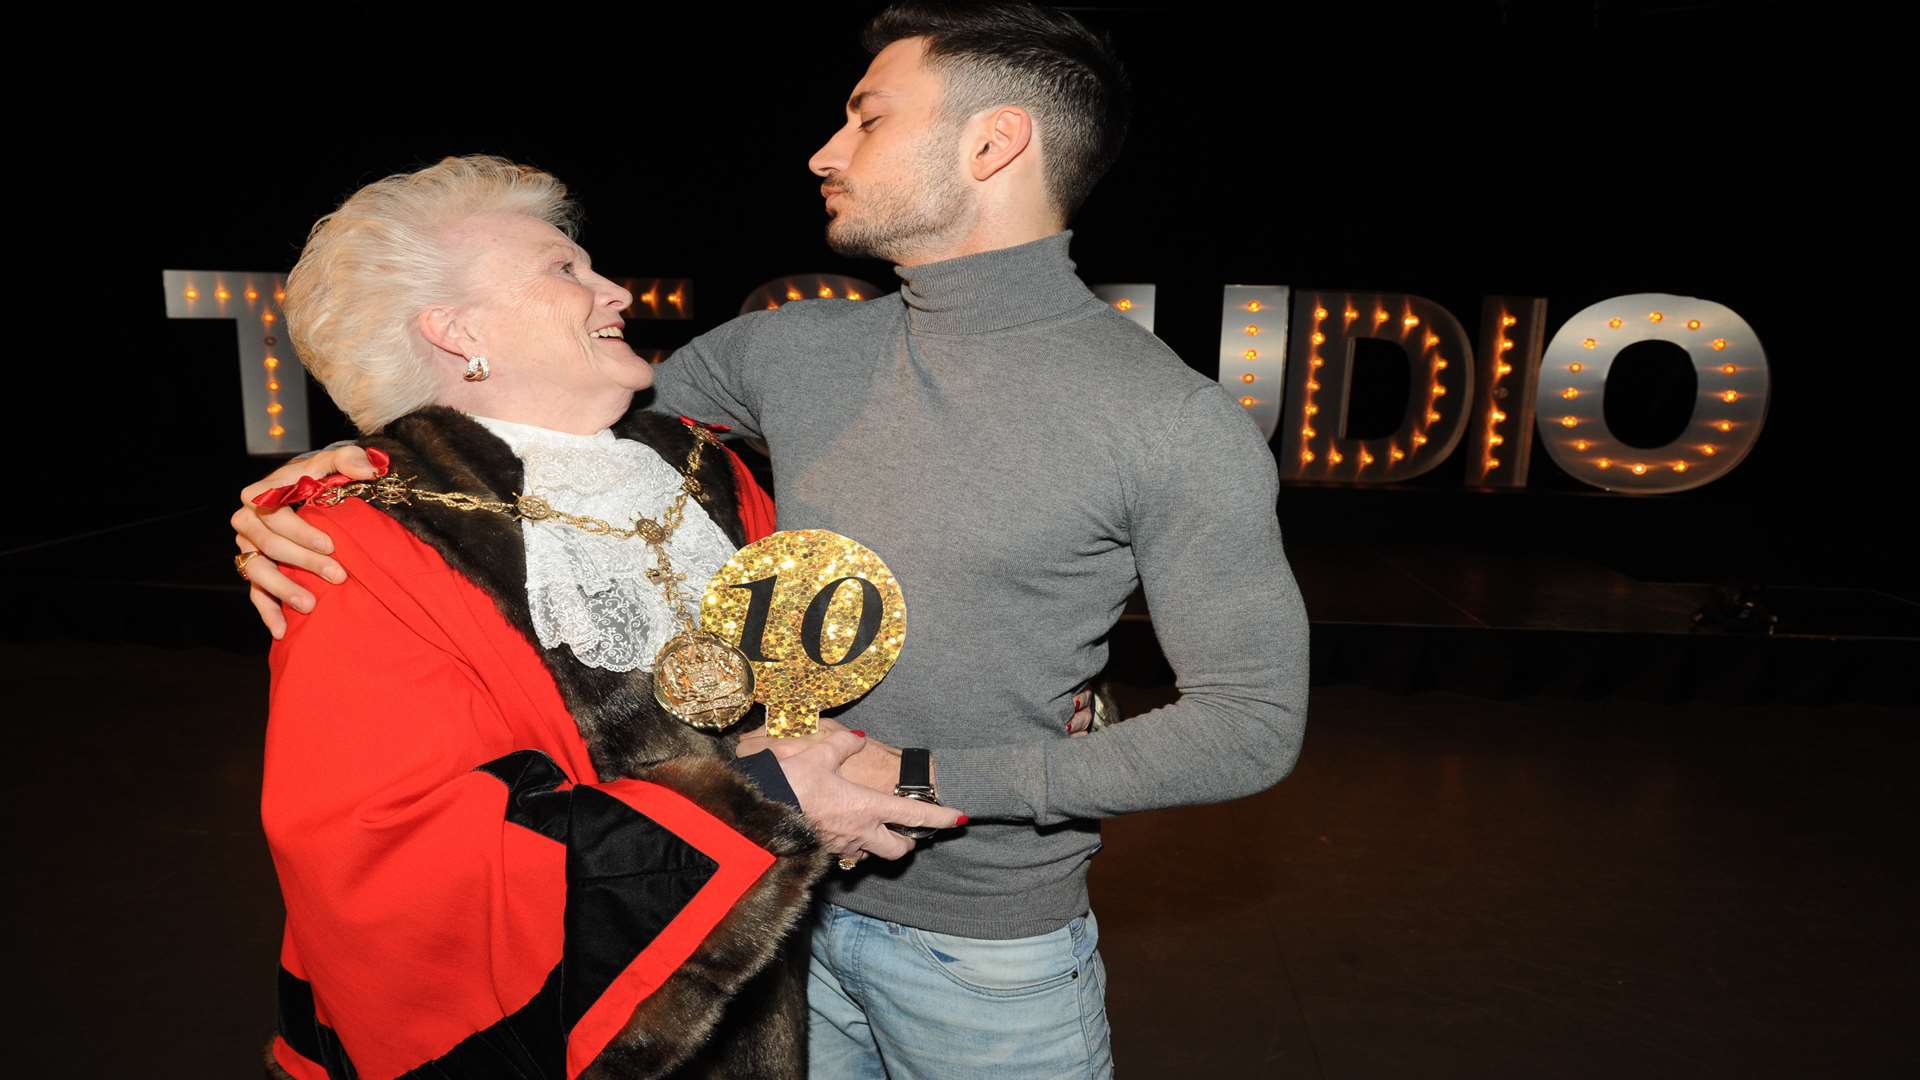 Cllr Goatley had a morning to remember when she danced with Strictly Come Dancing star Giovanni Pernice. Picture: Steve Crispe